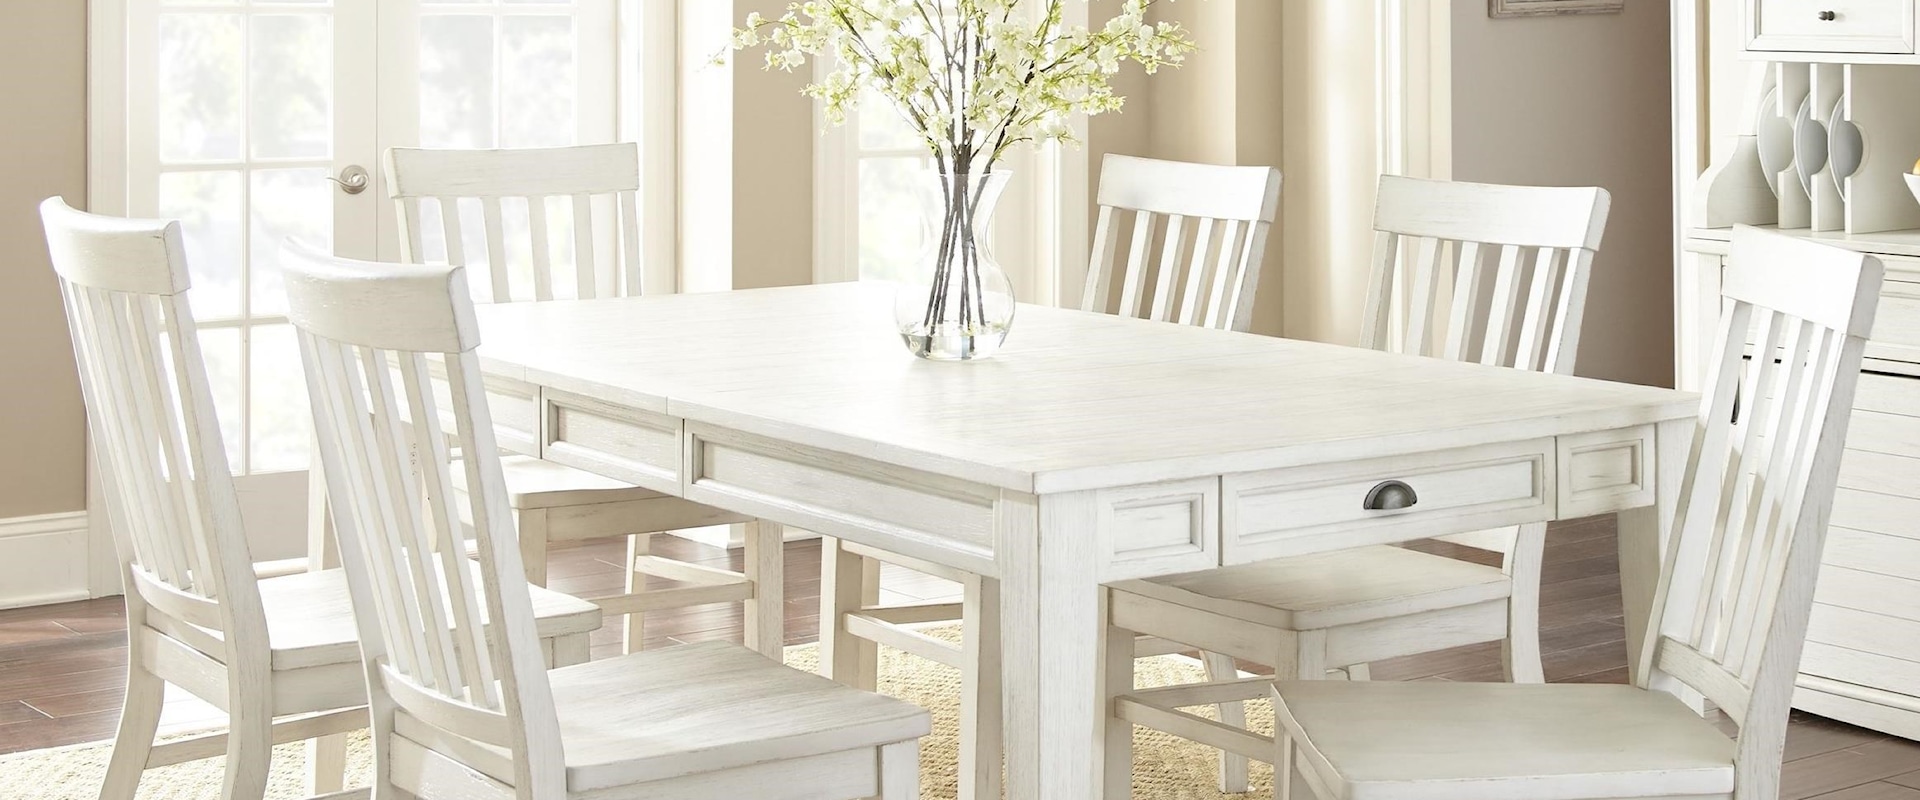 7 Piece Farmhouse Dining Set with Table Storage